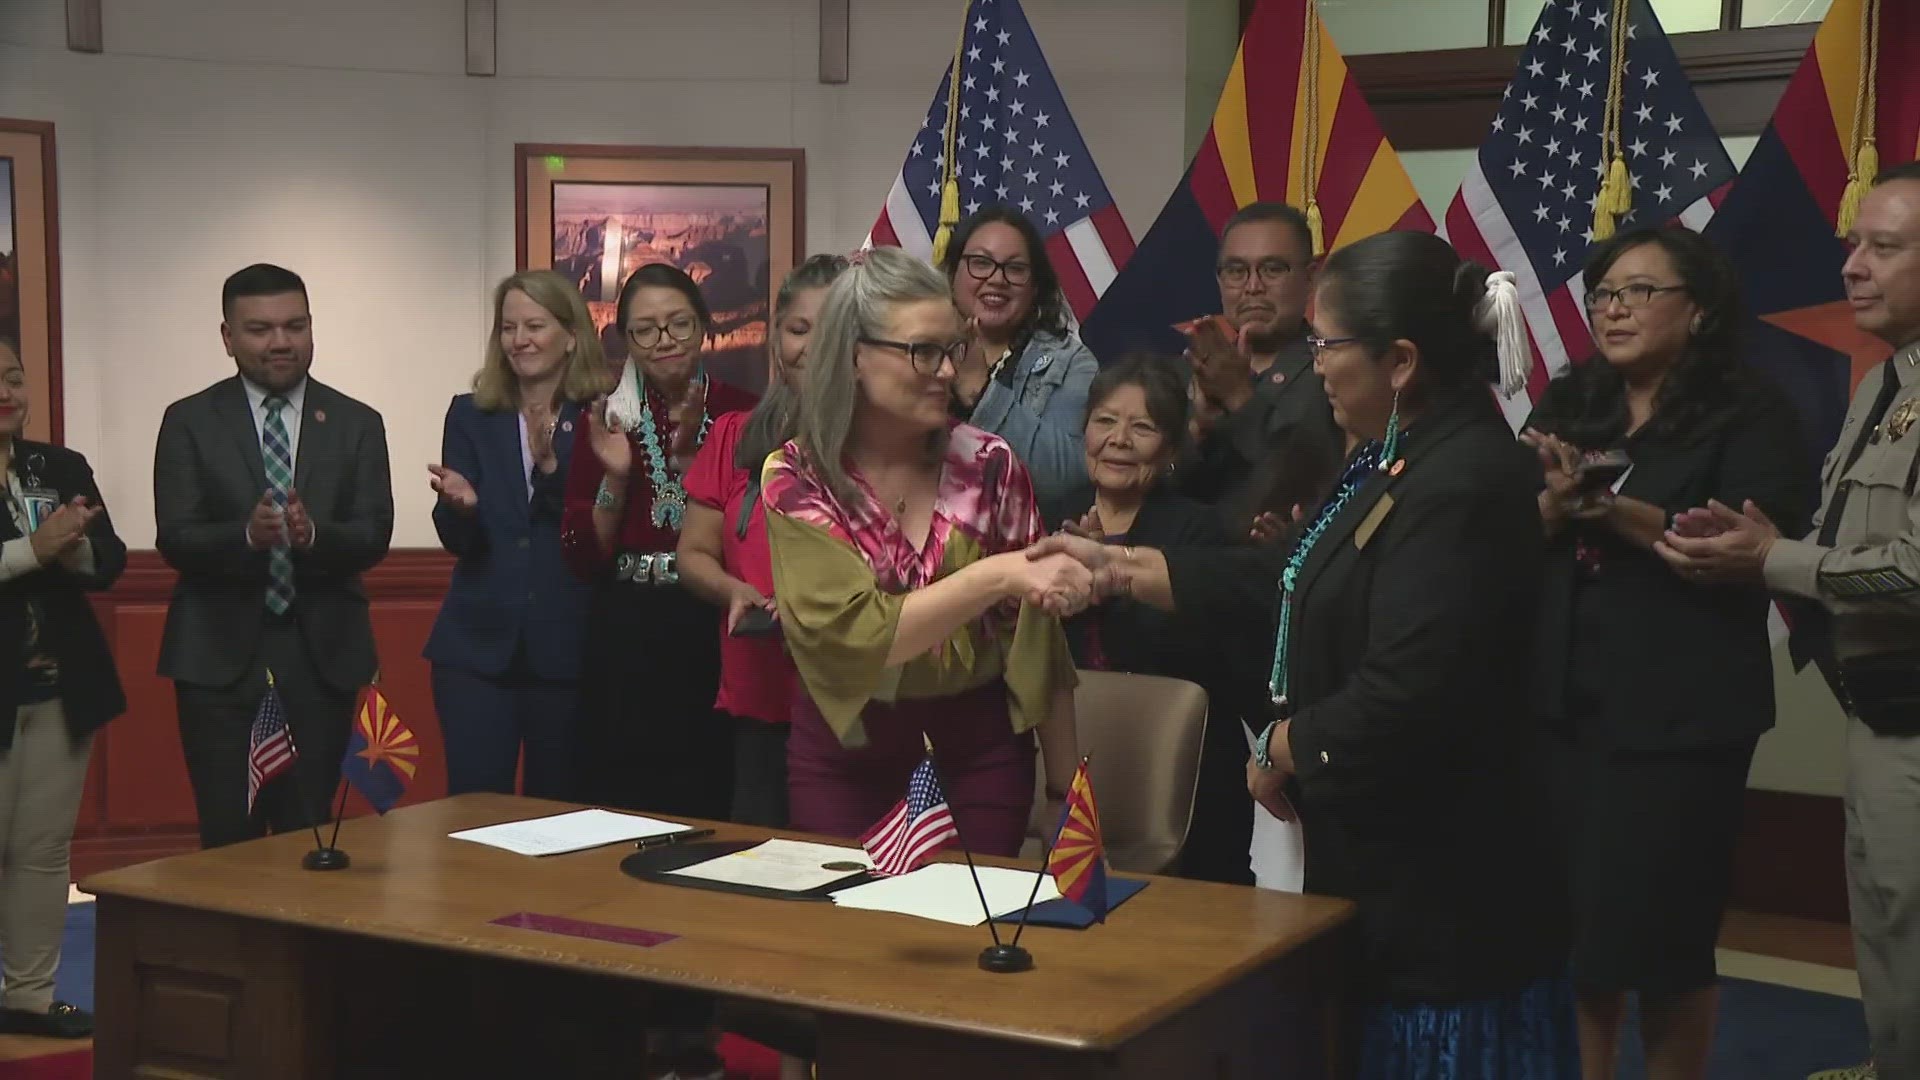 The Arizona task force will collaborate with state, federal and tribal agencies to reduce and end violence against Indigenous people in the state.